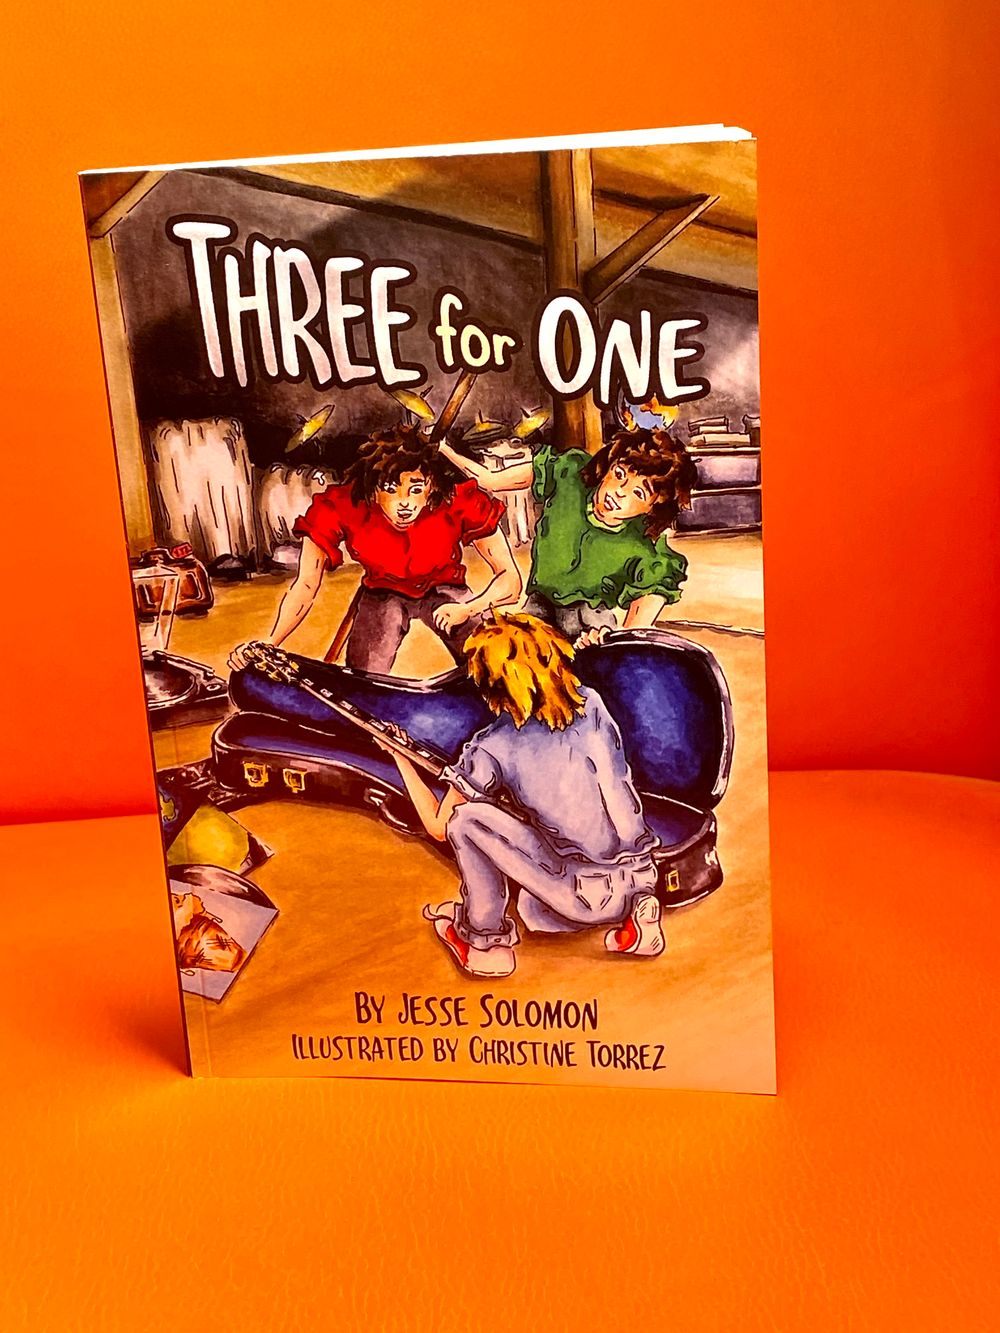 Grab the new young readers book!